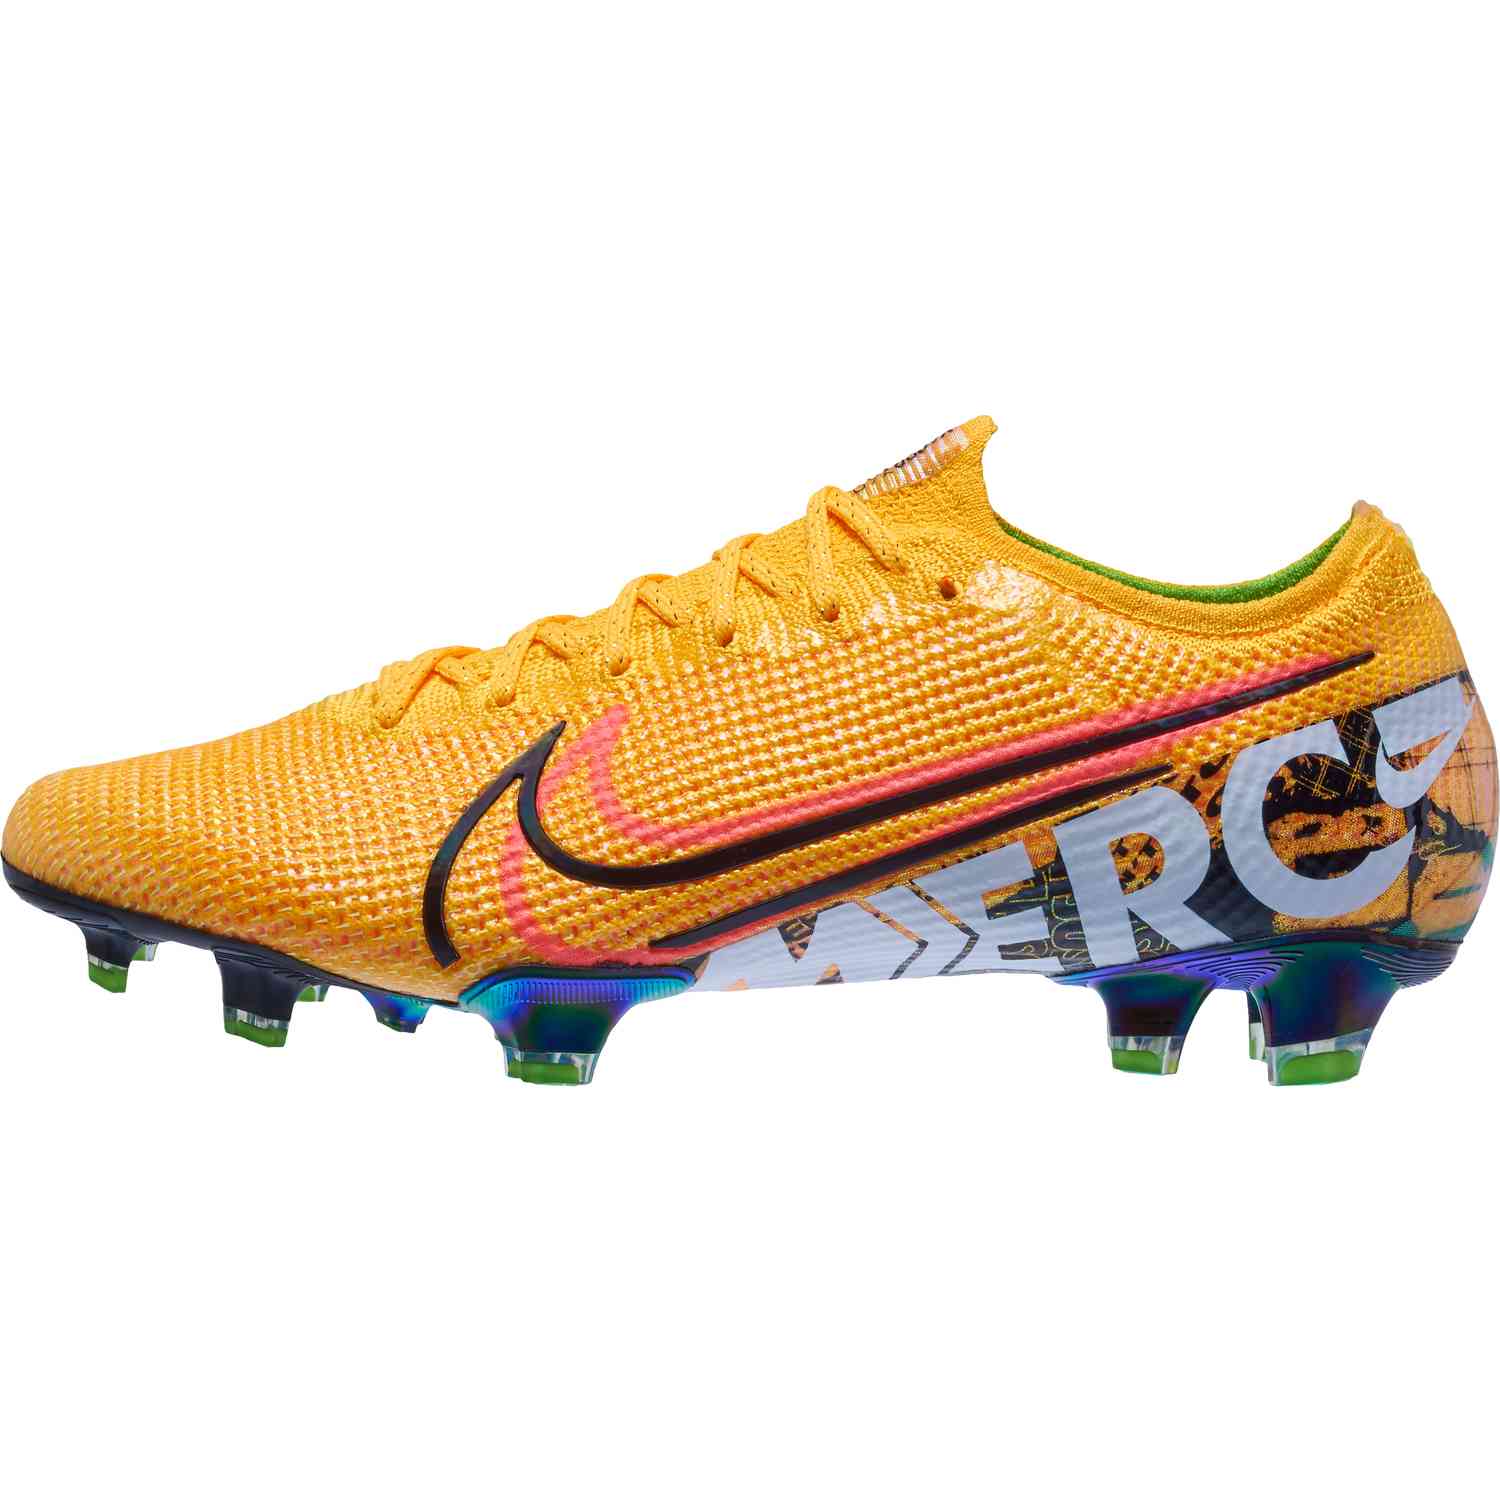 Nike Mercurial Vapor 13 Pro MDS FG Firm Ground Soccer Cleat